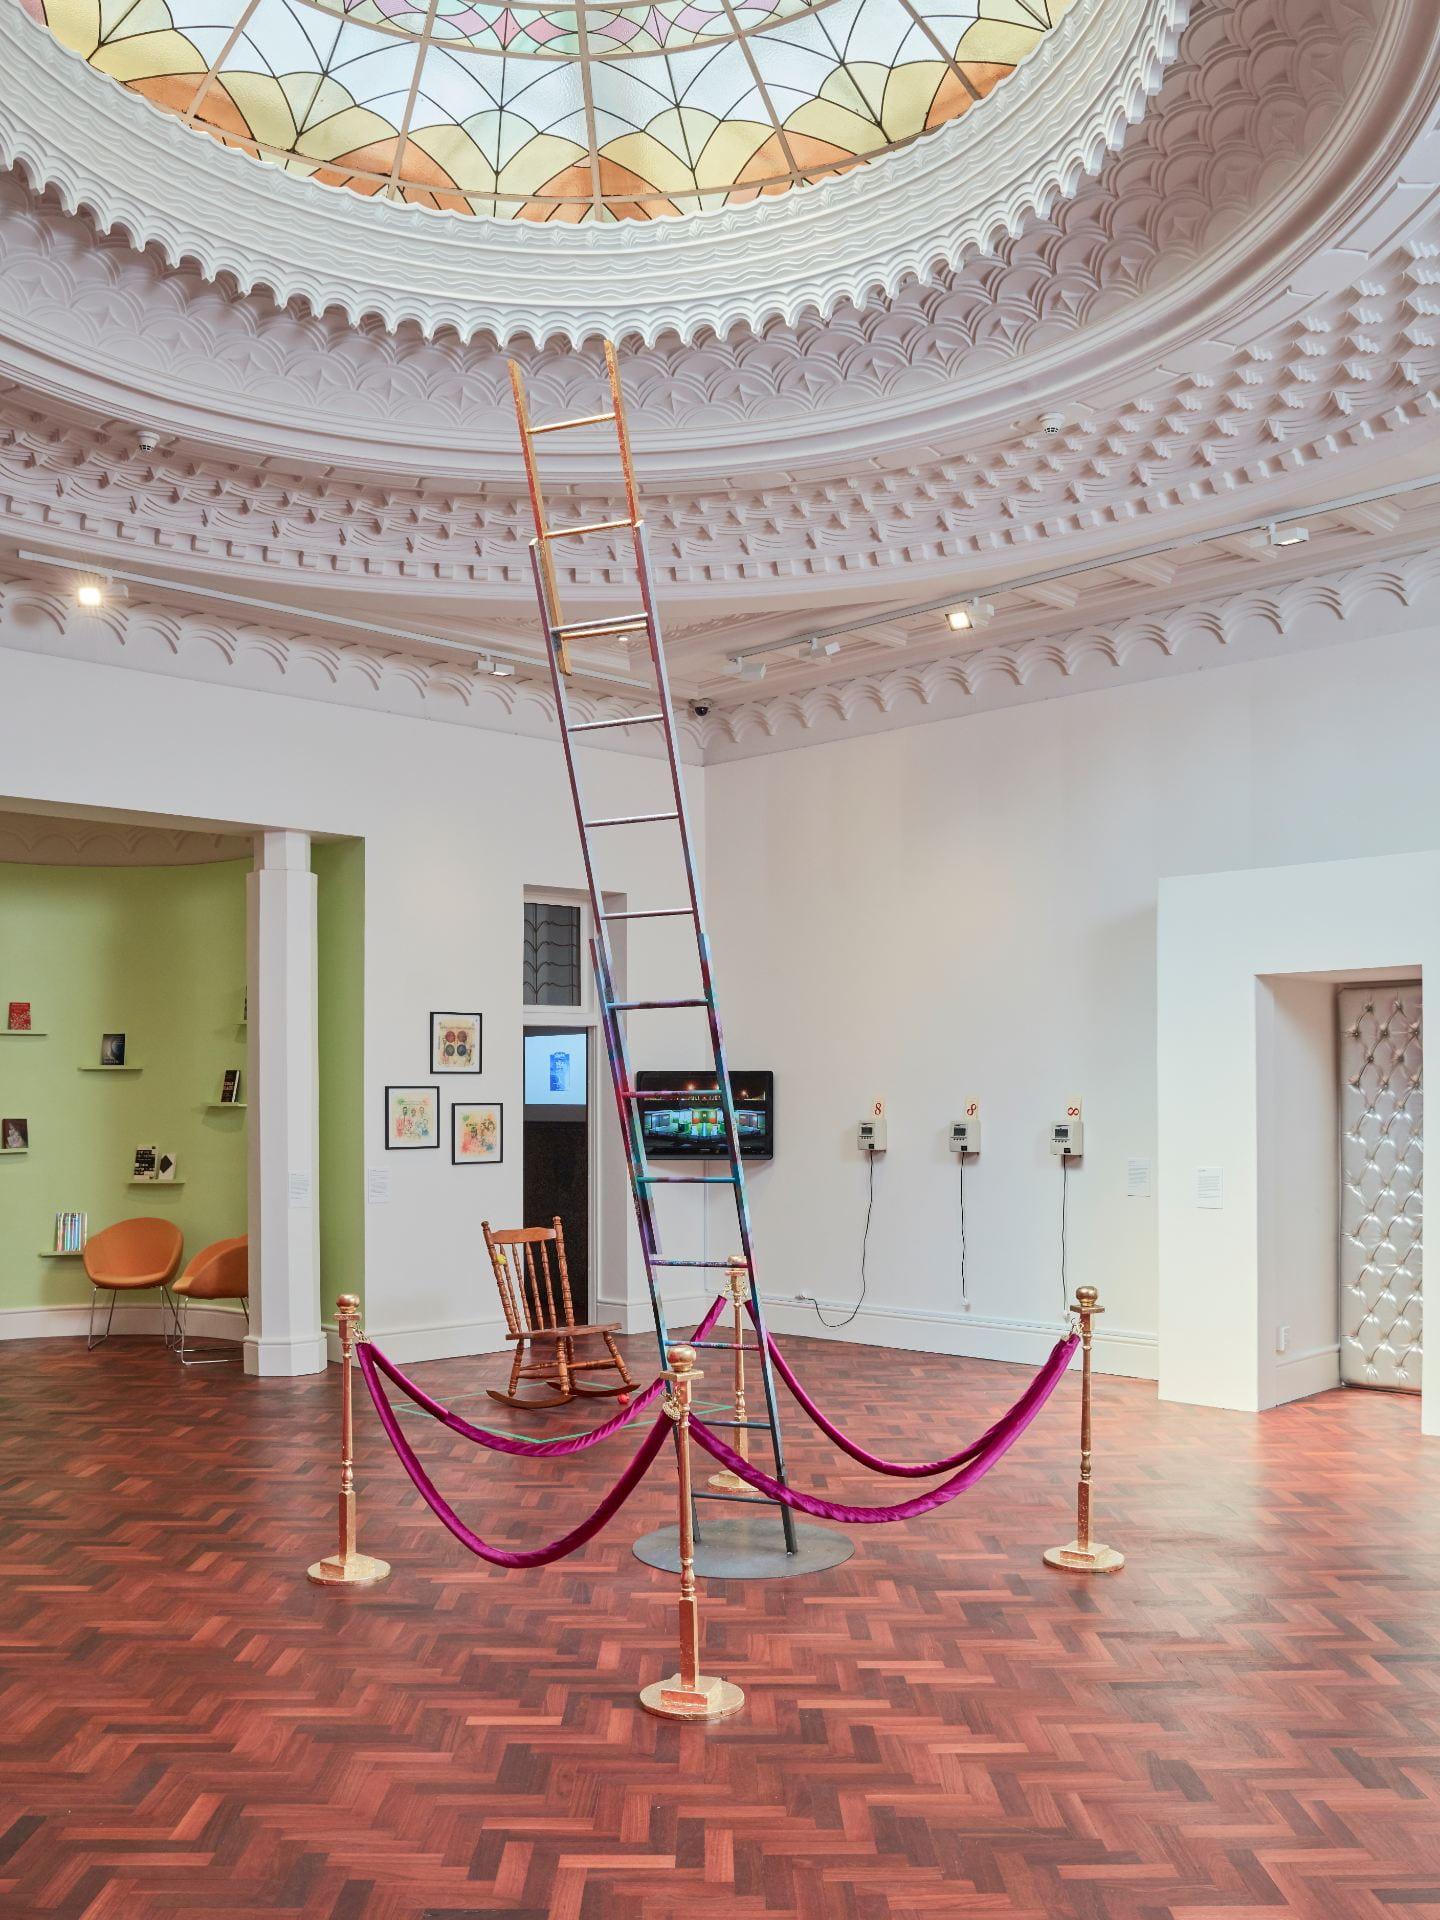 A gallery space with an elaborate dome ceiling and wooden floor. In the centre of the room a ladder decorated with graffiti and gilded at the top stretches towards the ceiling, surrounded by gold bollards with velvet pink ropes.